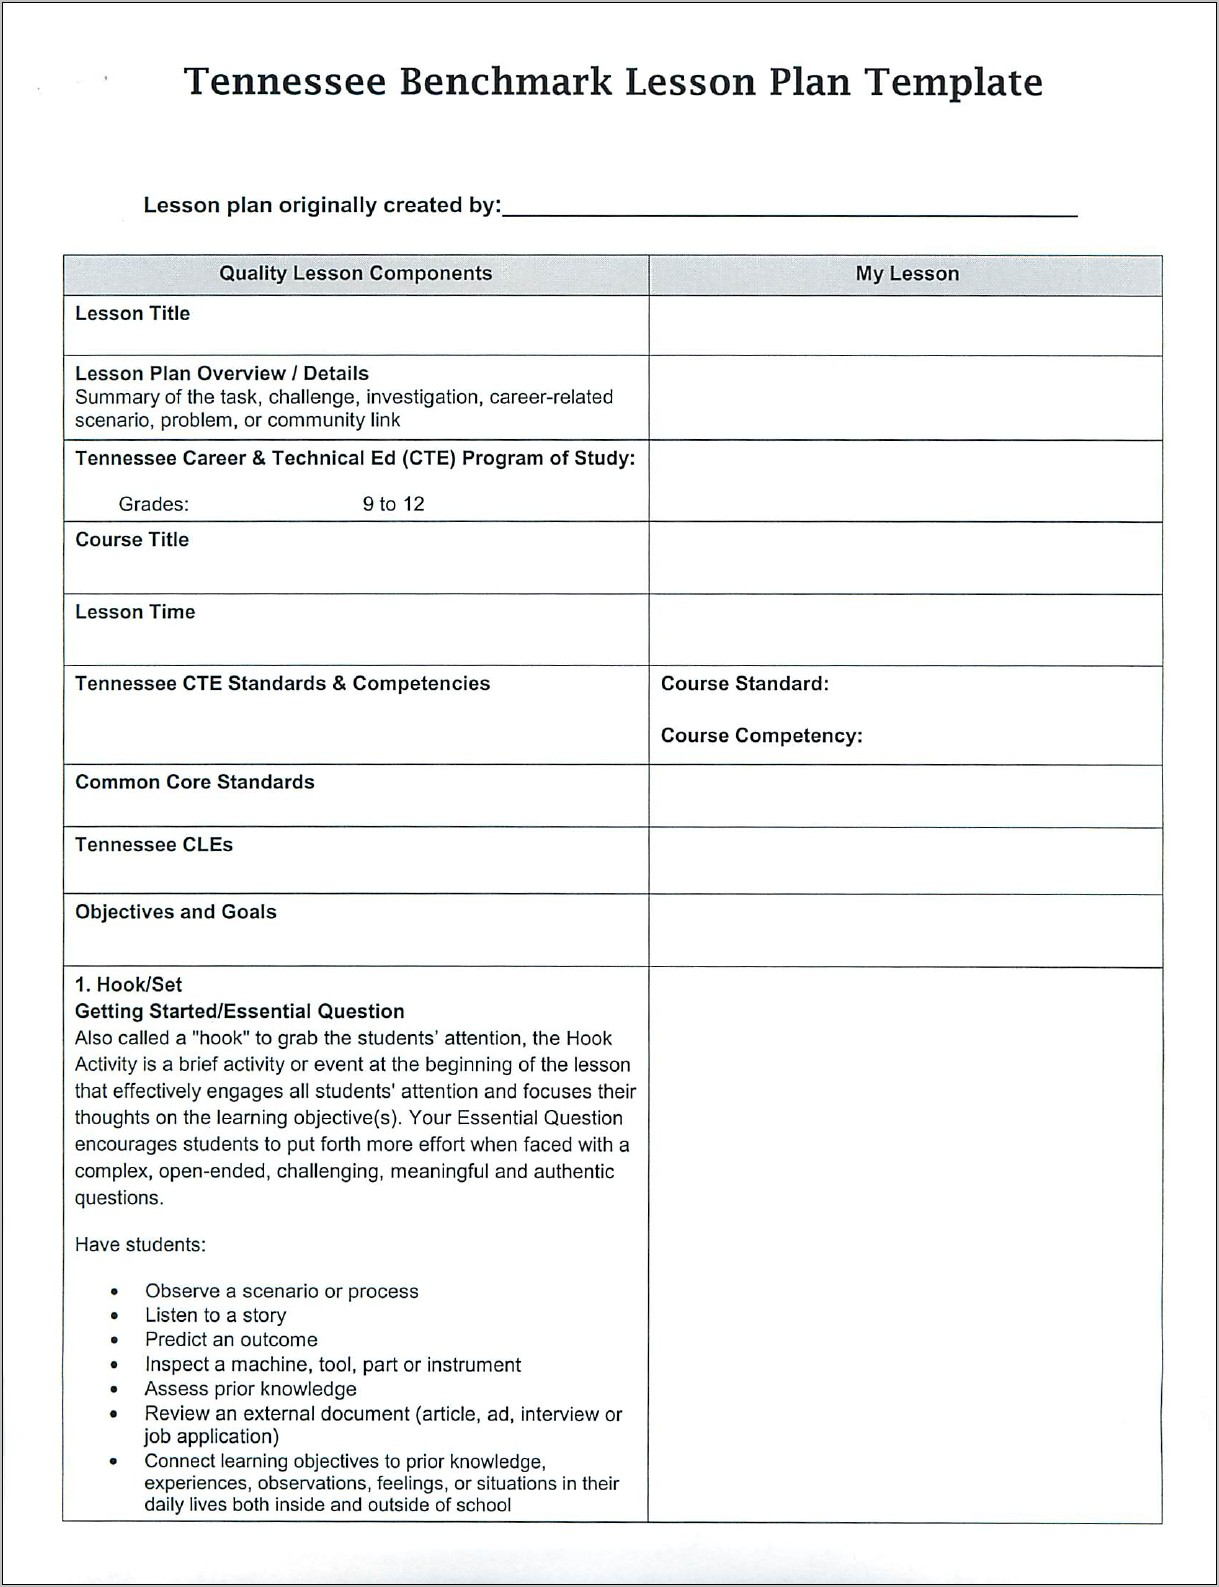 Tennessee Benchmark Lesson Plan Template